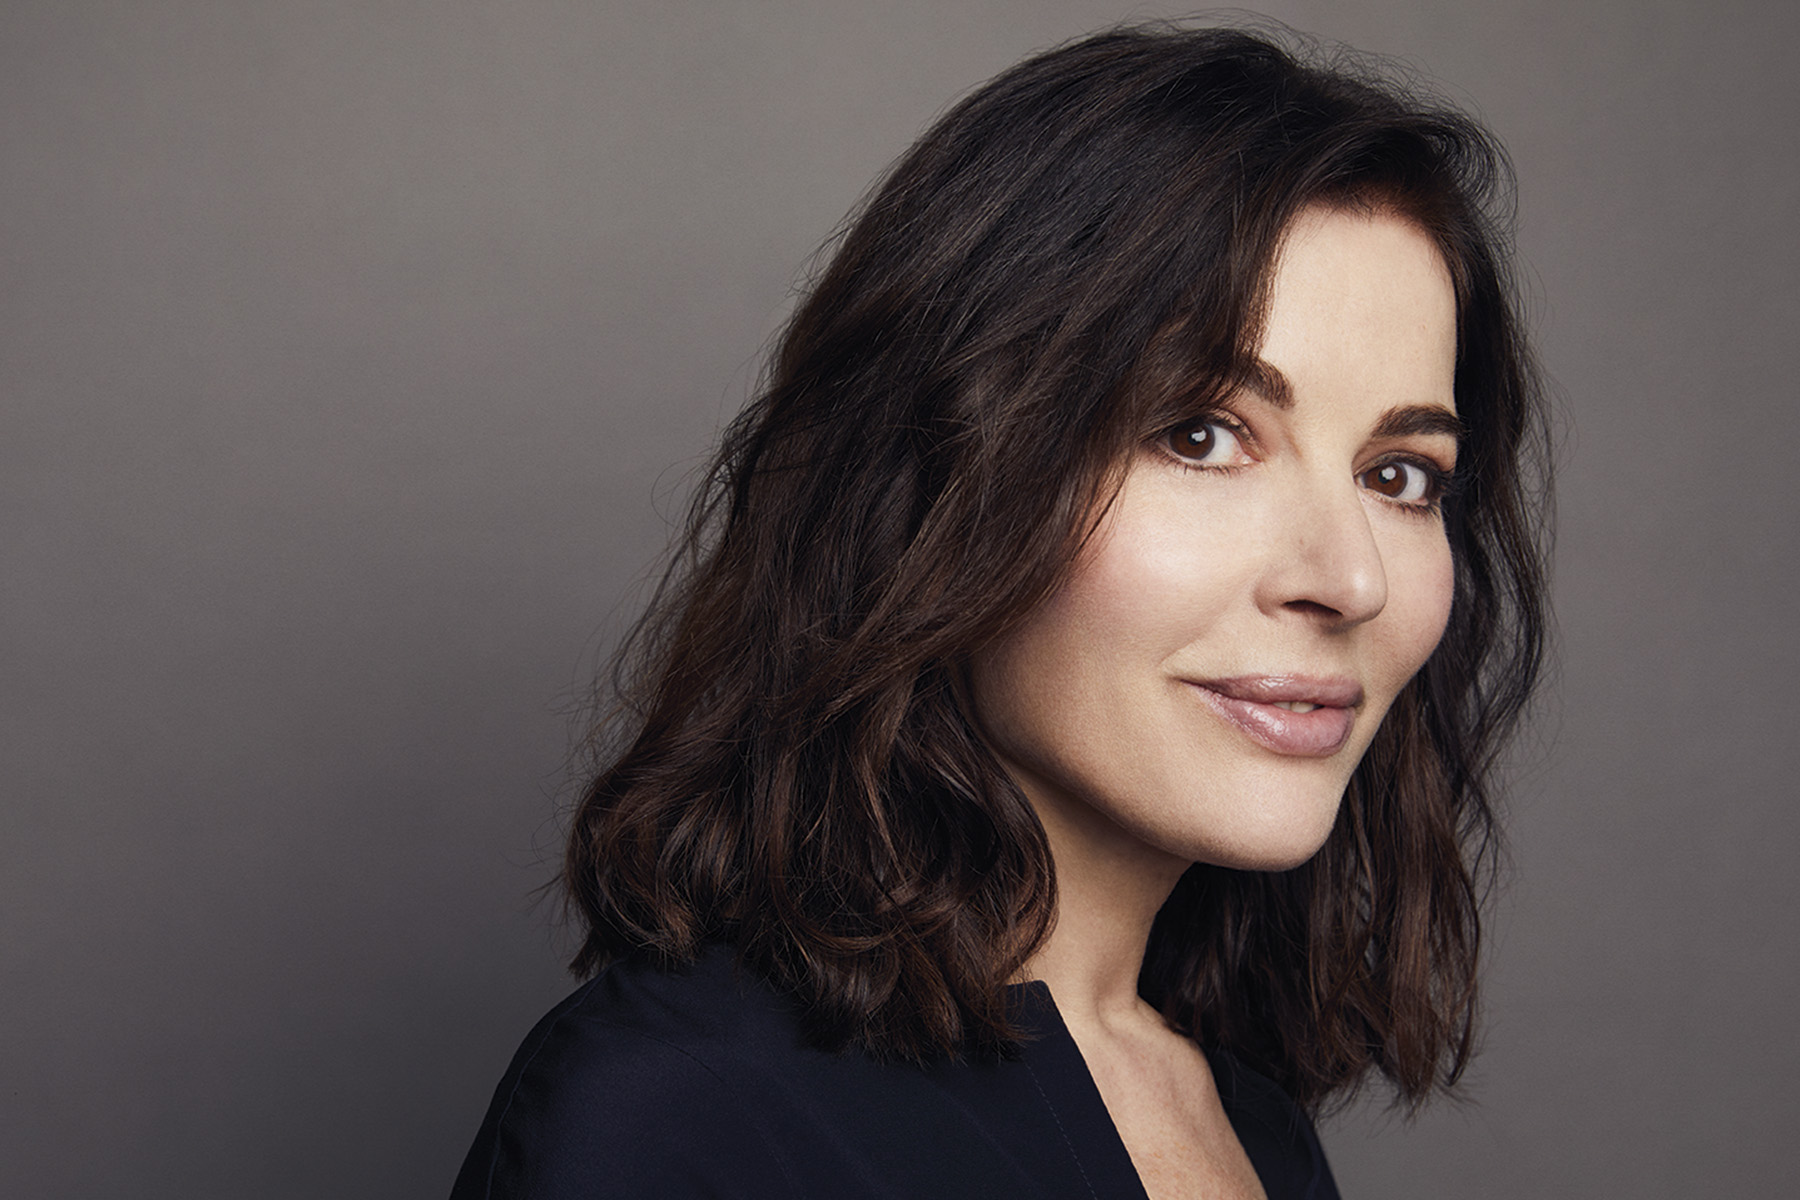 Head and shoulders photo of Nigella Lawson, wearing a black top, turned to the side but looking at the camera.